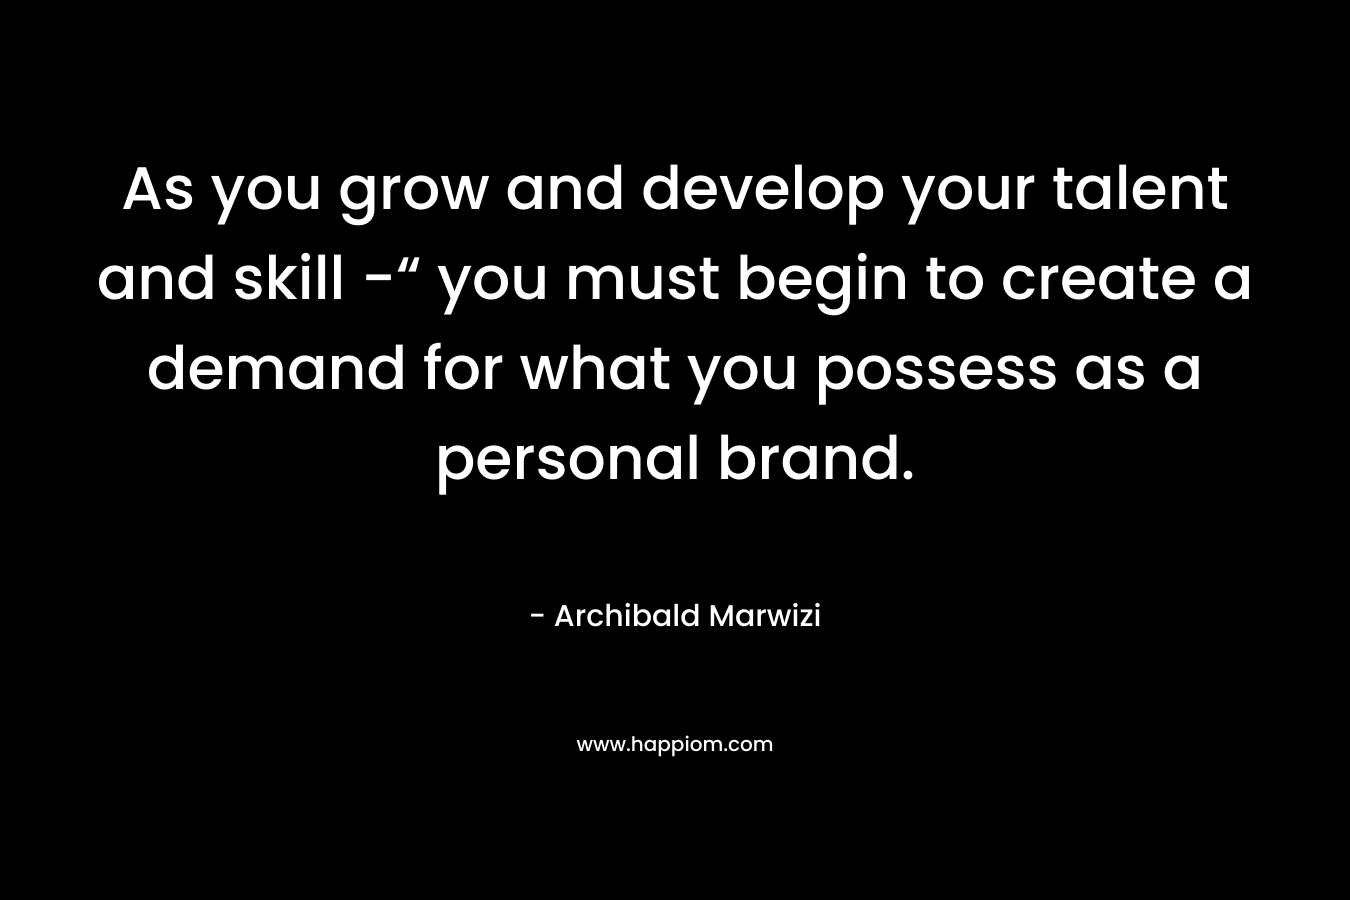 As you grow and develop your talent and skill -“ you must begin to create a demand for what you possess as a personal brand.